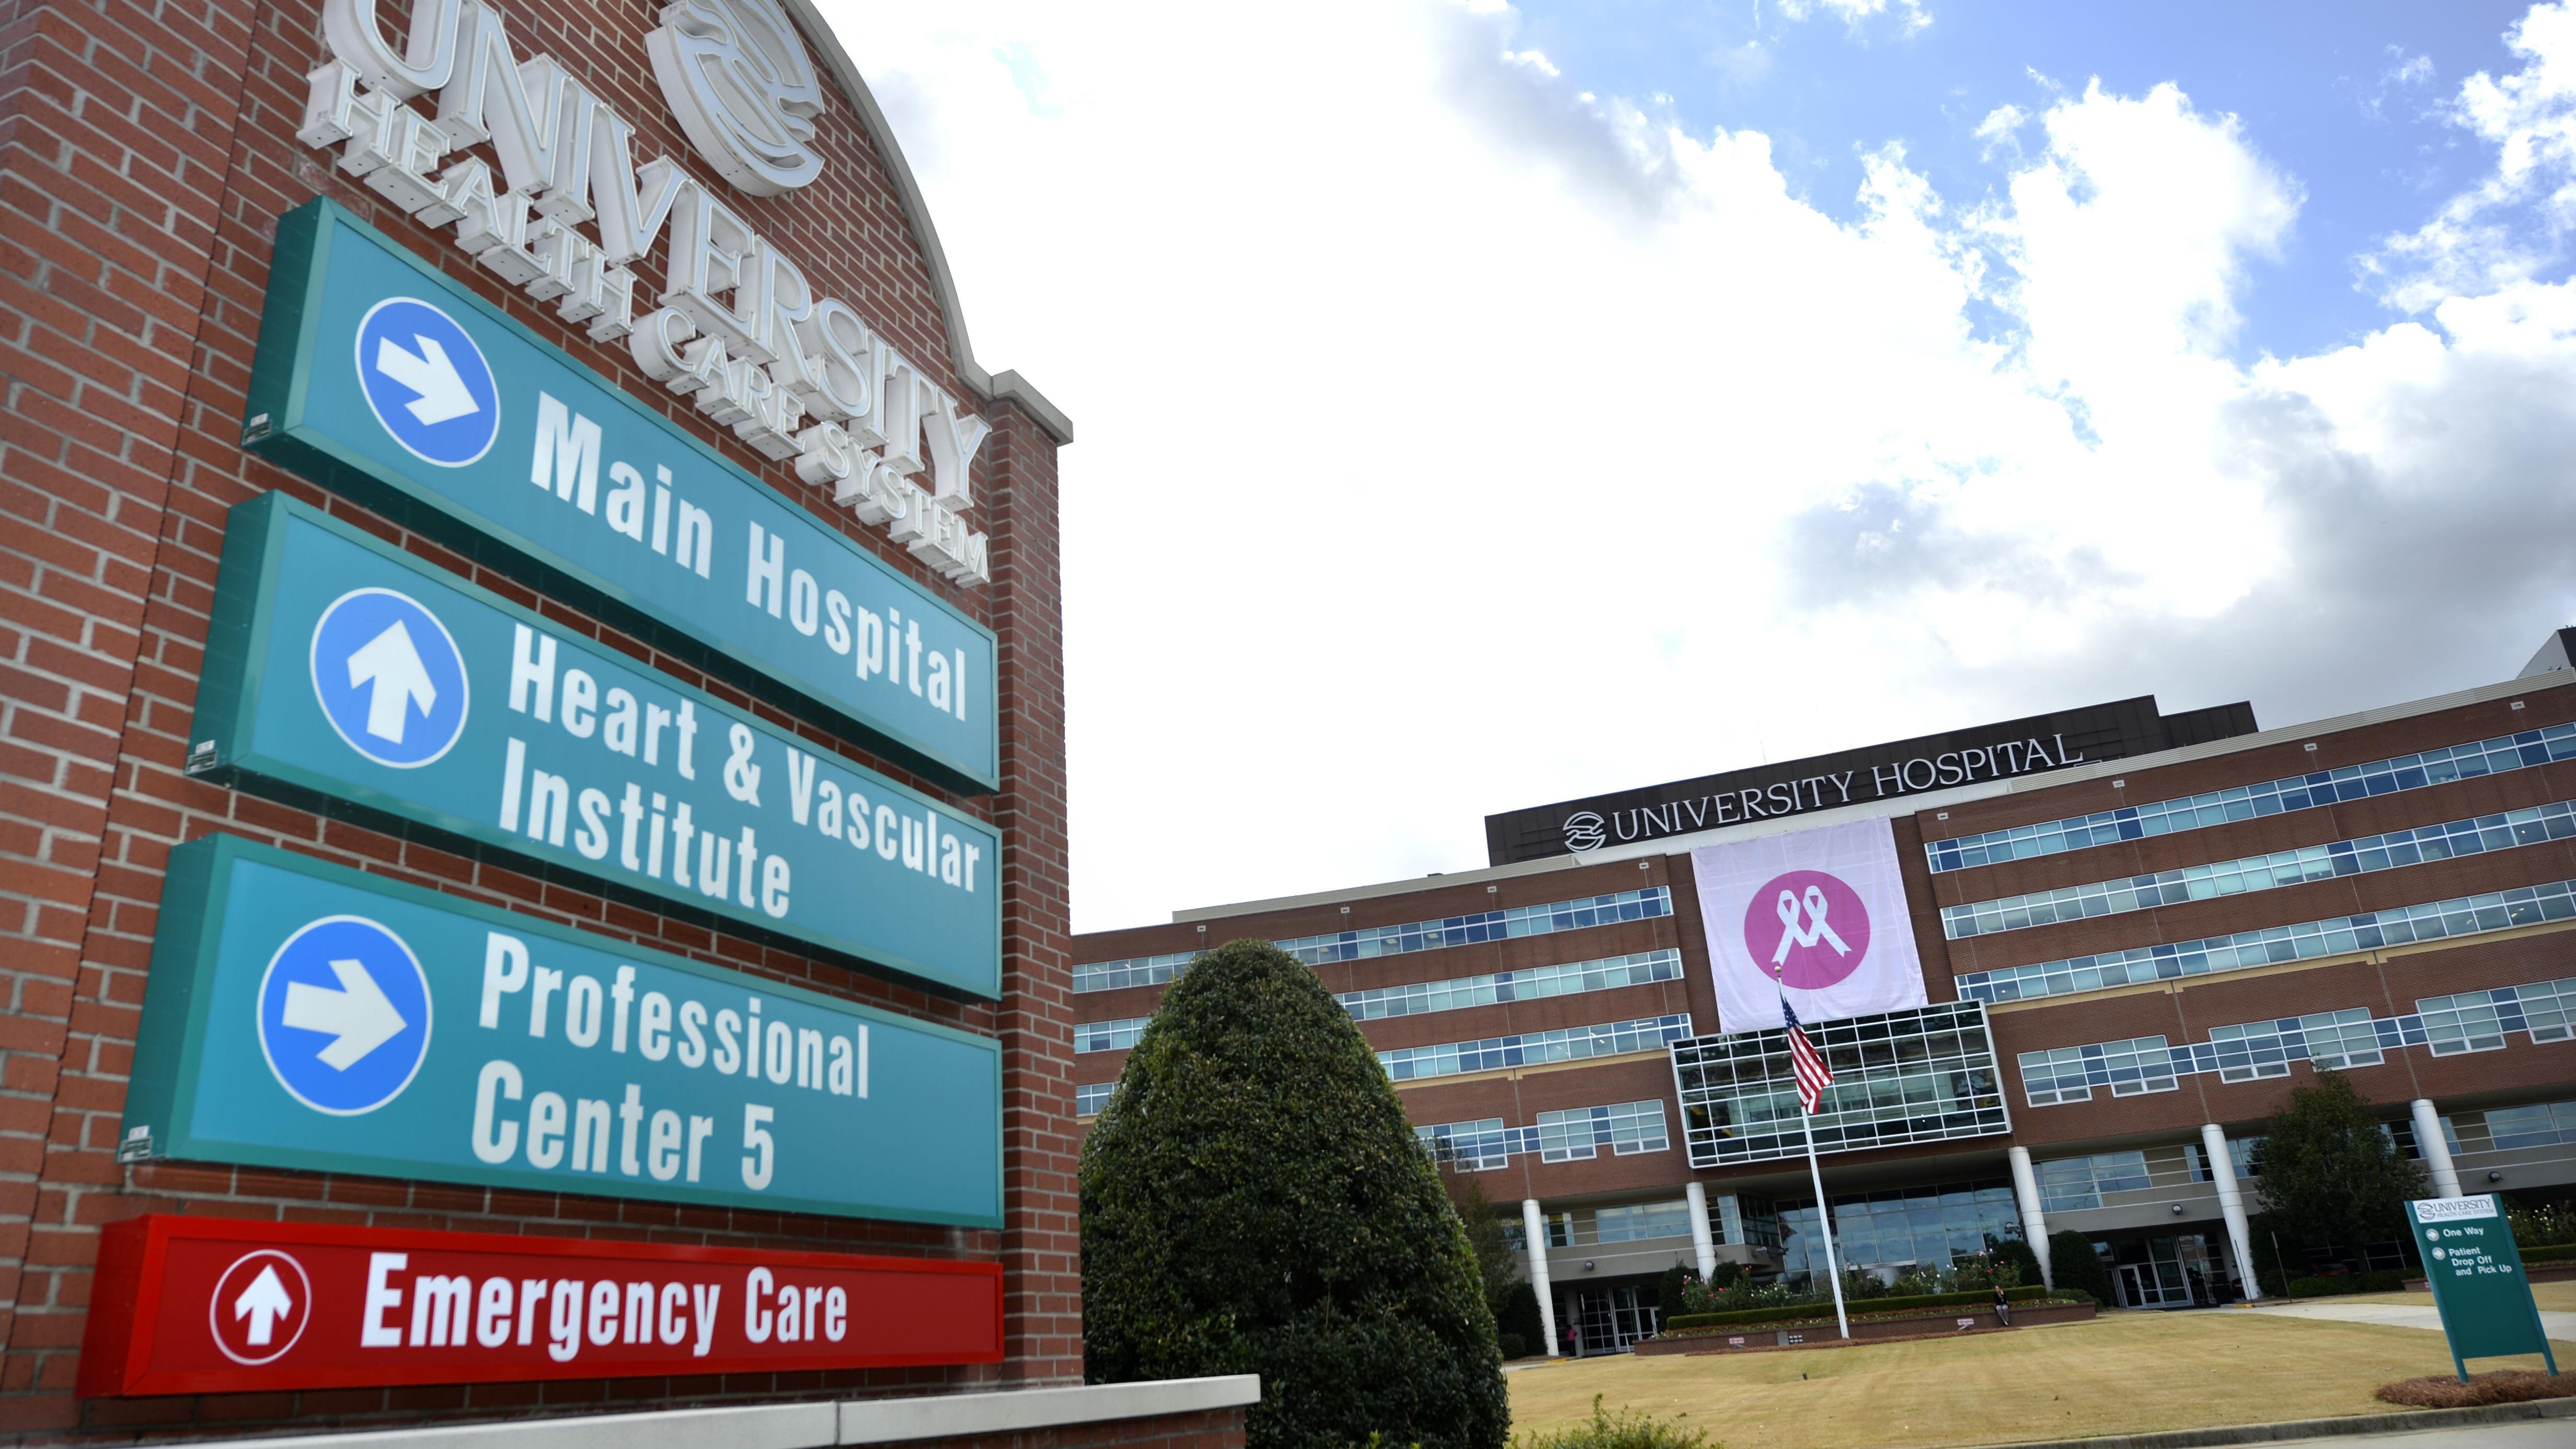 University Hospital To Form Home Health Venture With National Partner